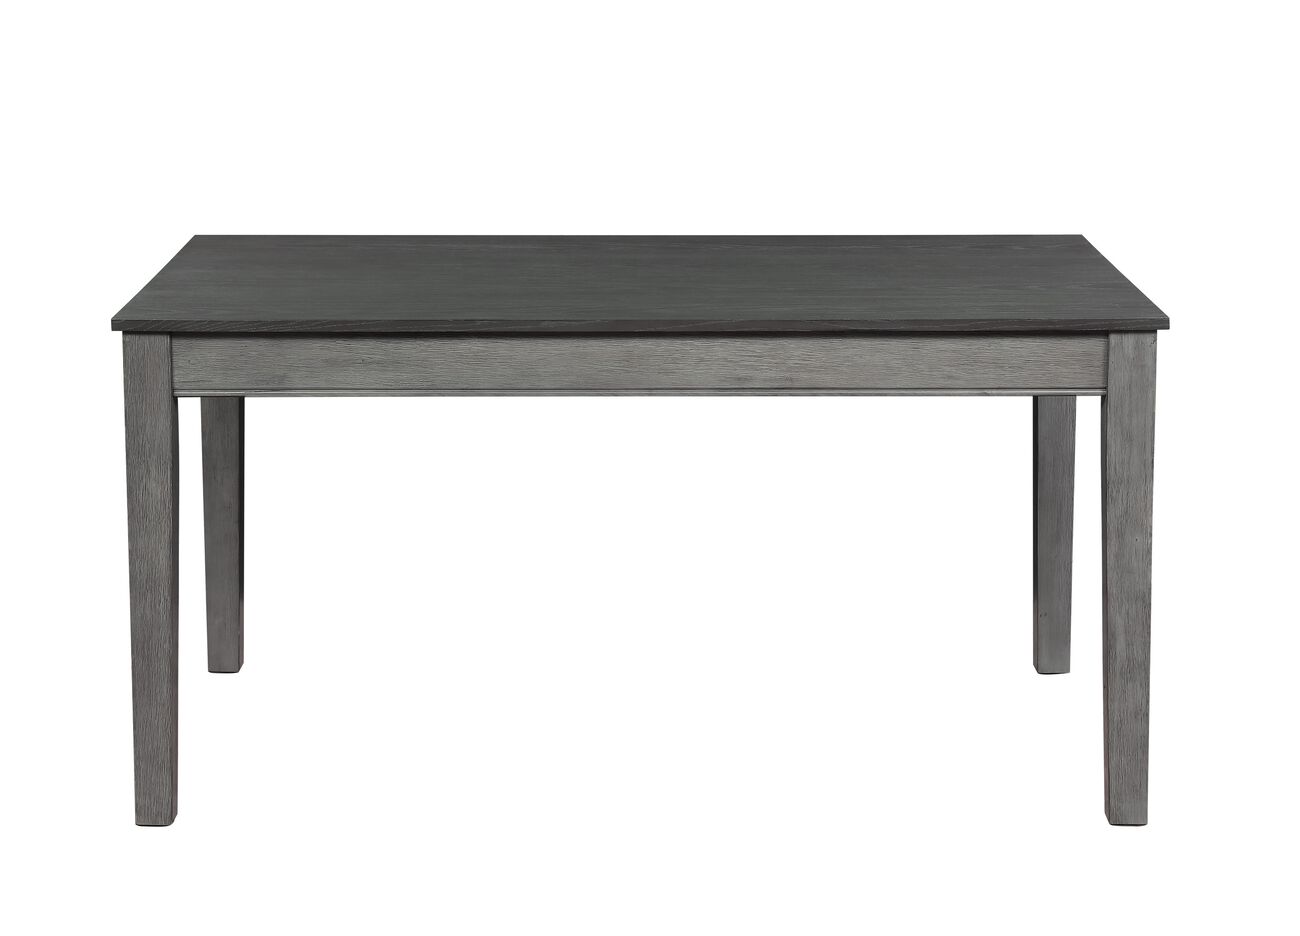 Rectangular Wooden Dining Table with 2 Drawers and Tapered Legs, Gray